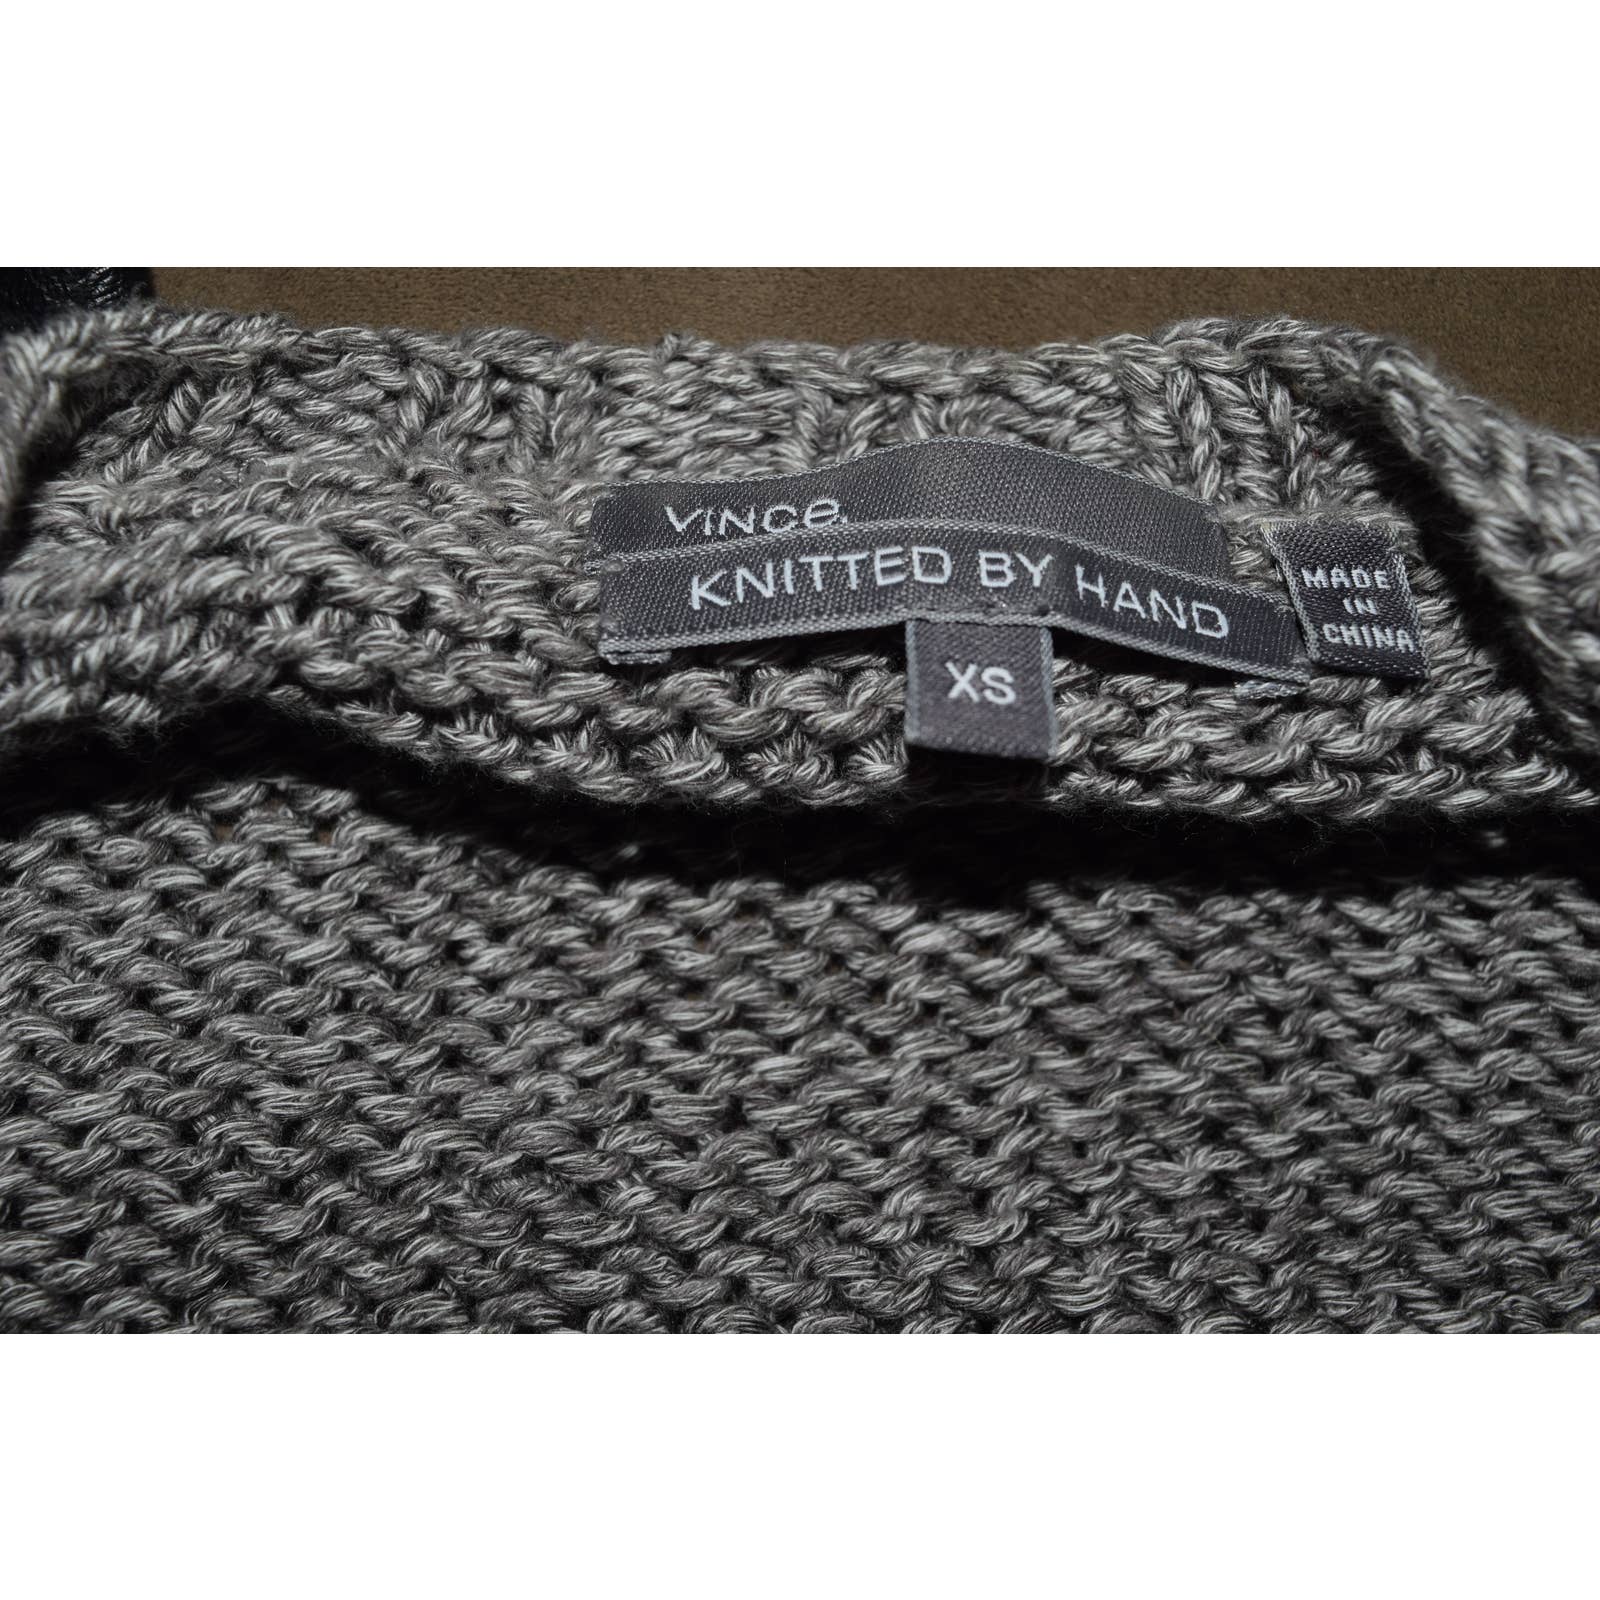 Vince Knitted by Hand Gray V-Neck Sweater -XS